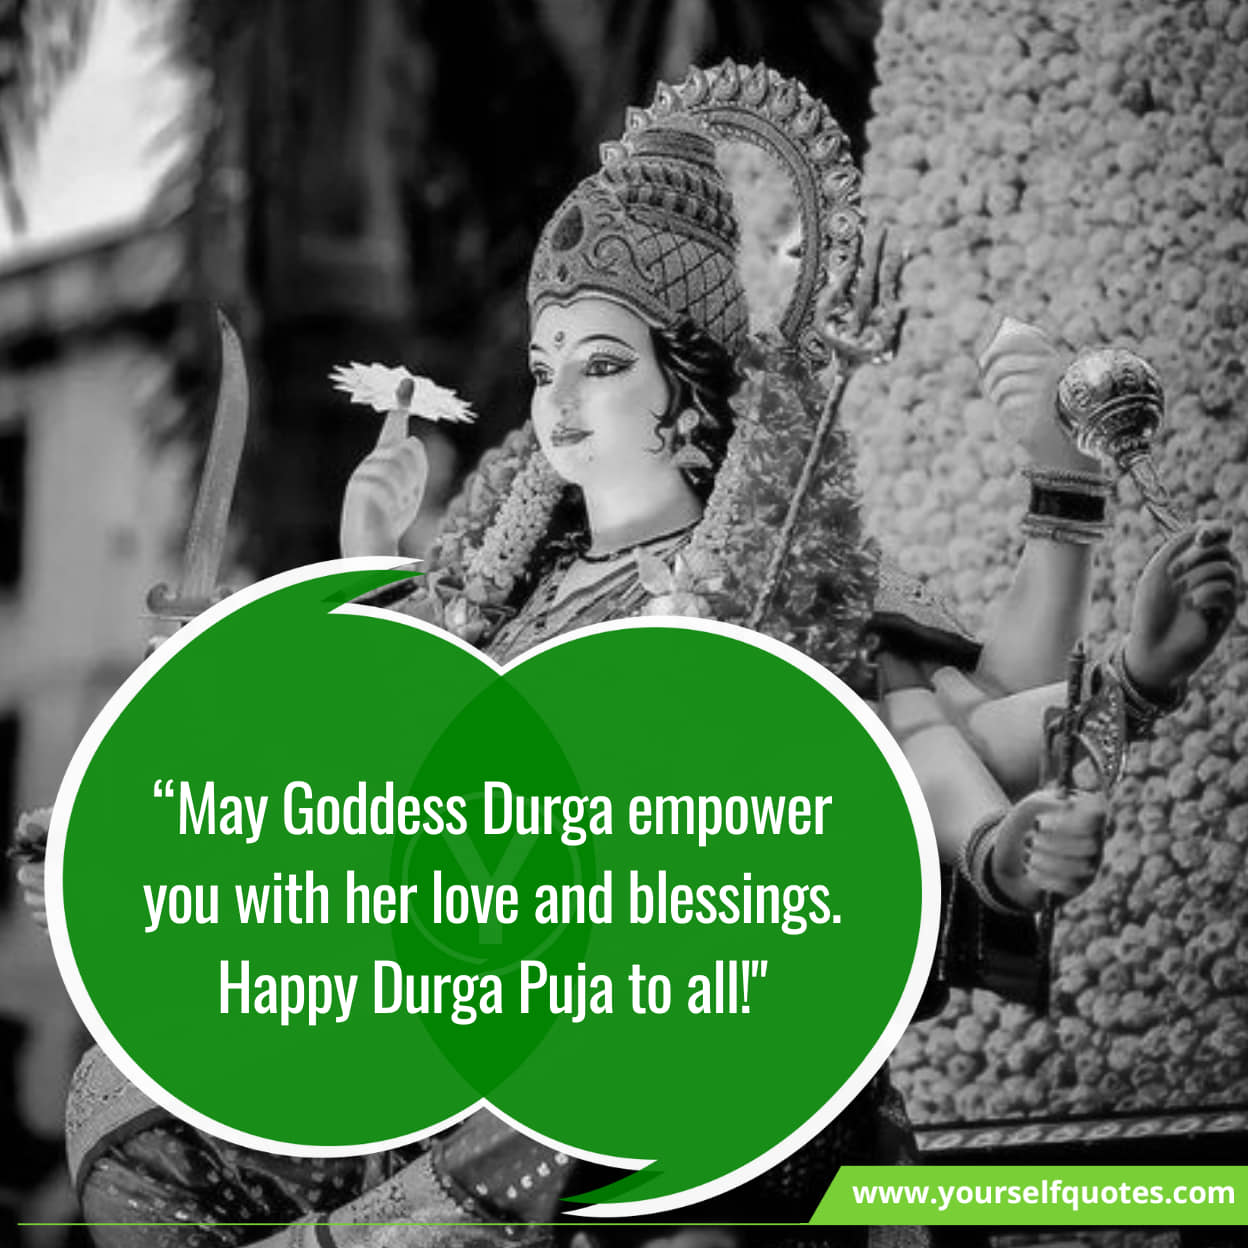 Happy Durga Puja wishes for family and friends